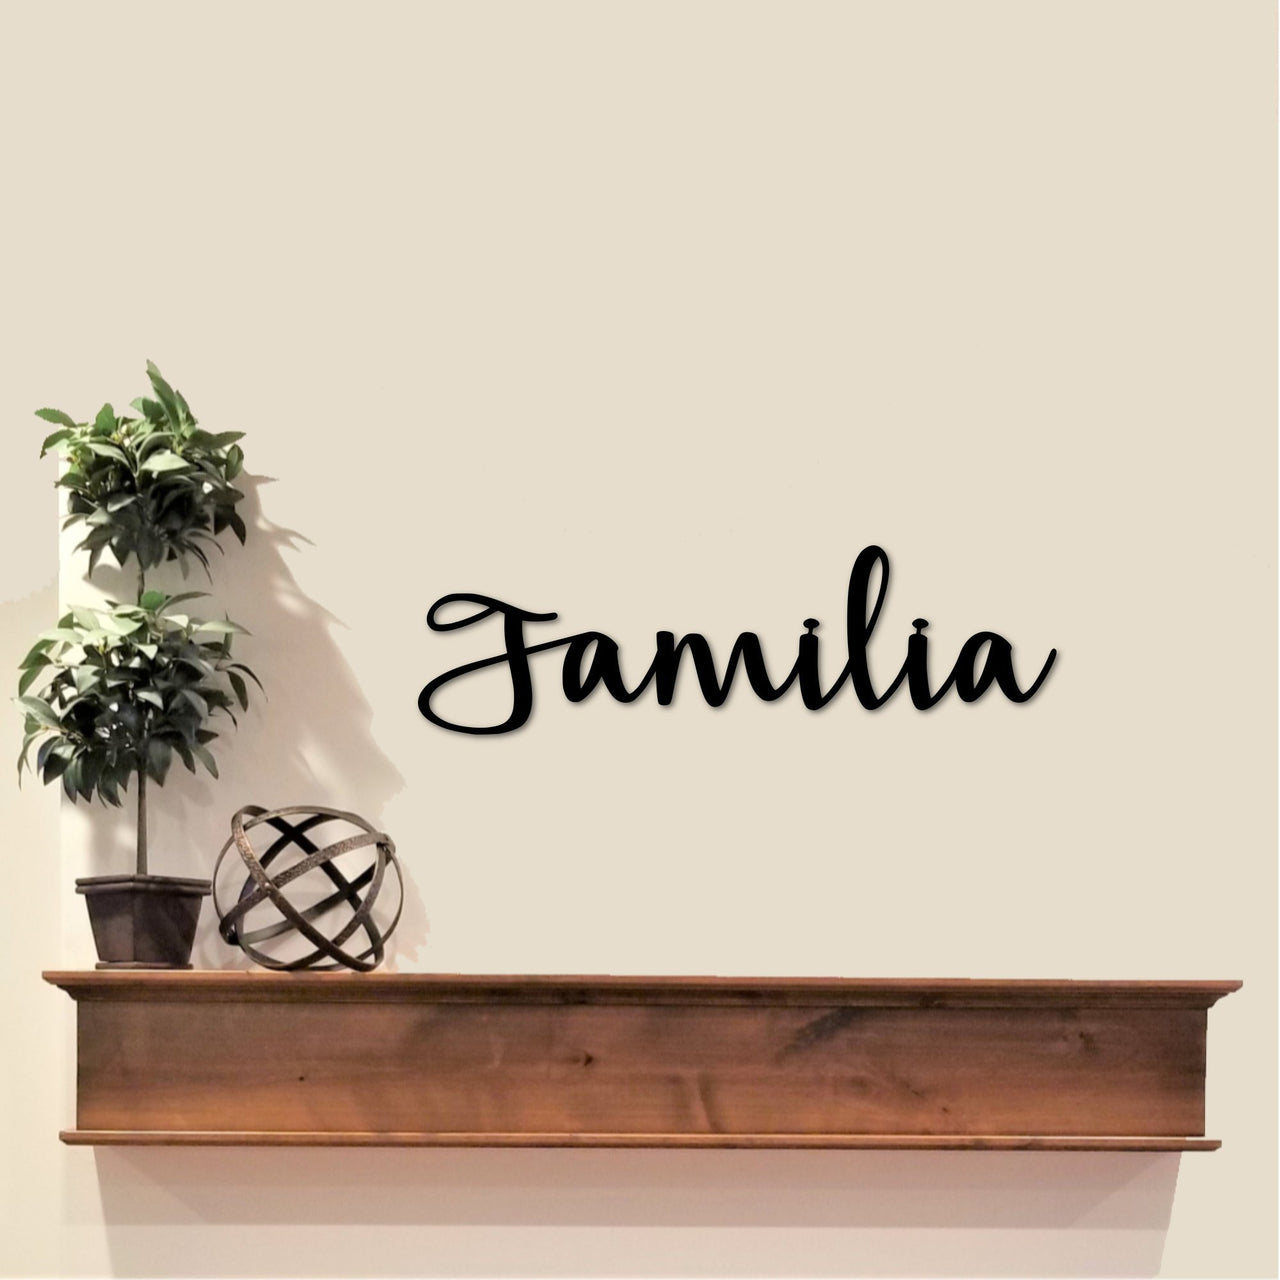 Familia Metal Sign | Steel Script Words for the Wall | Spanish Family Cursive Word Metal Wall Decor | Family Room Decor | Family Photo Wall